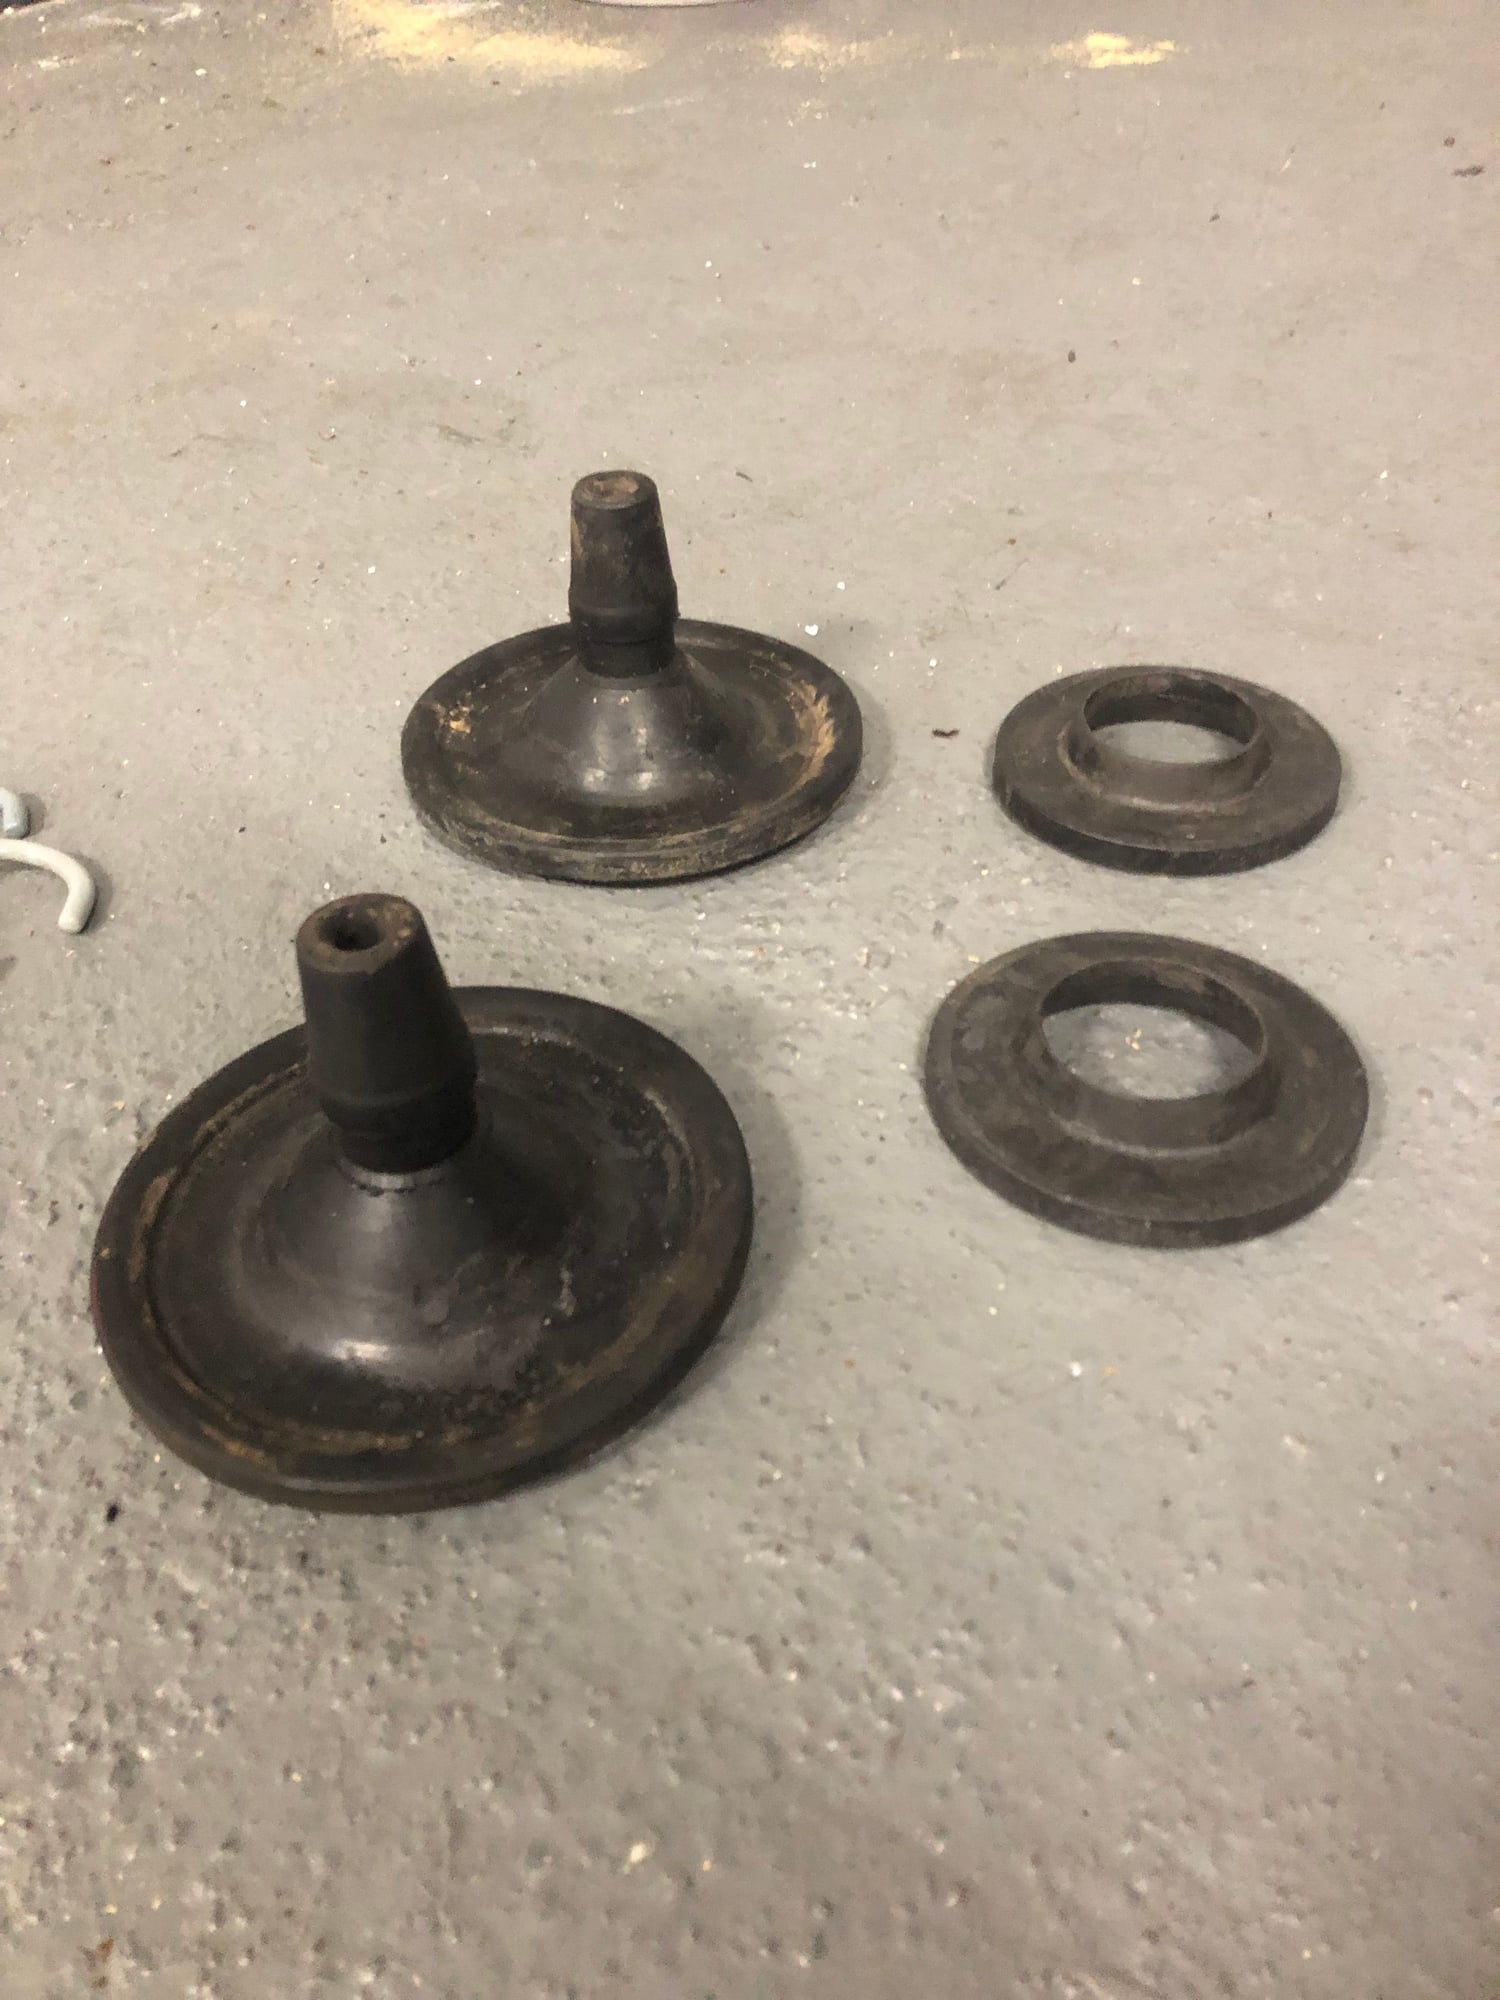 Steering/Suspension - Teraflex 1/2 inch spacers - Used - 2007 to 2018 Jeep Wrangler - East Meadow, NY 11554, United States